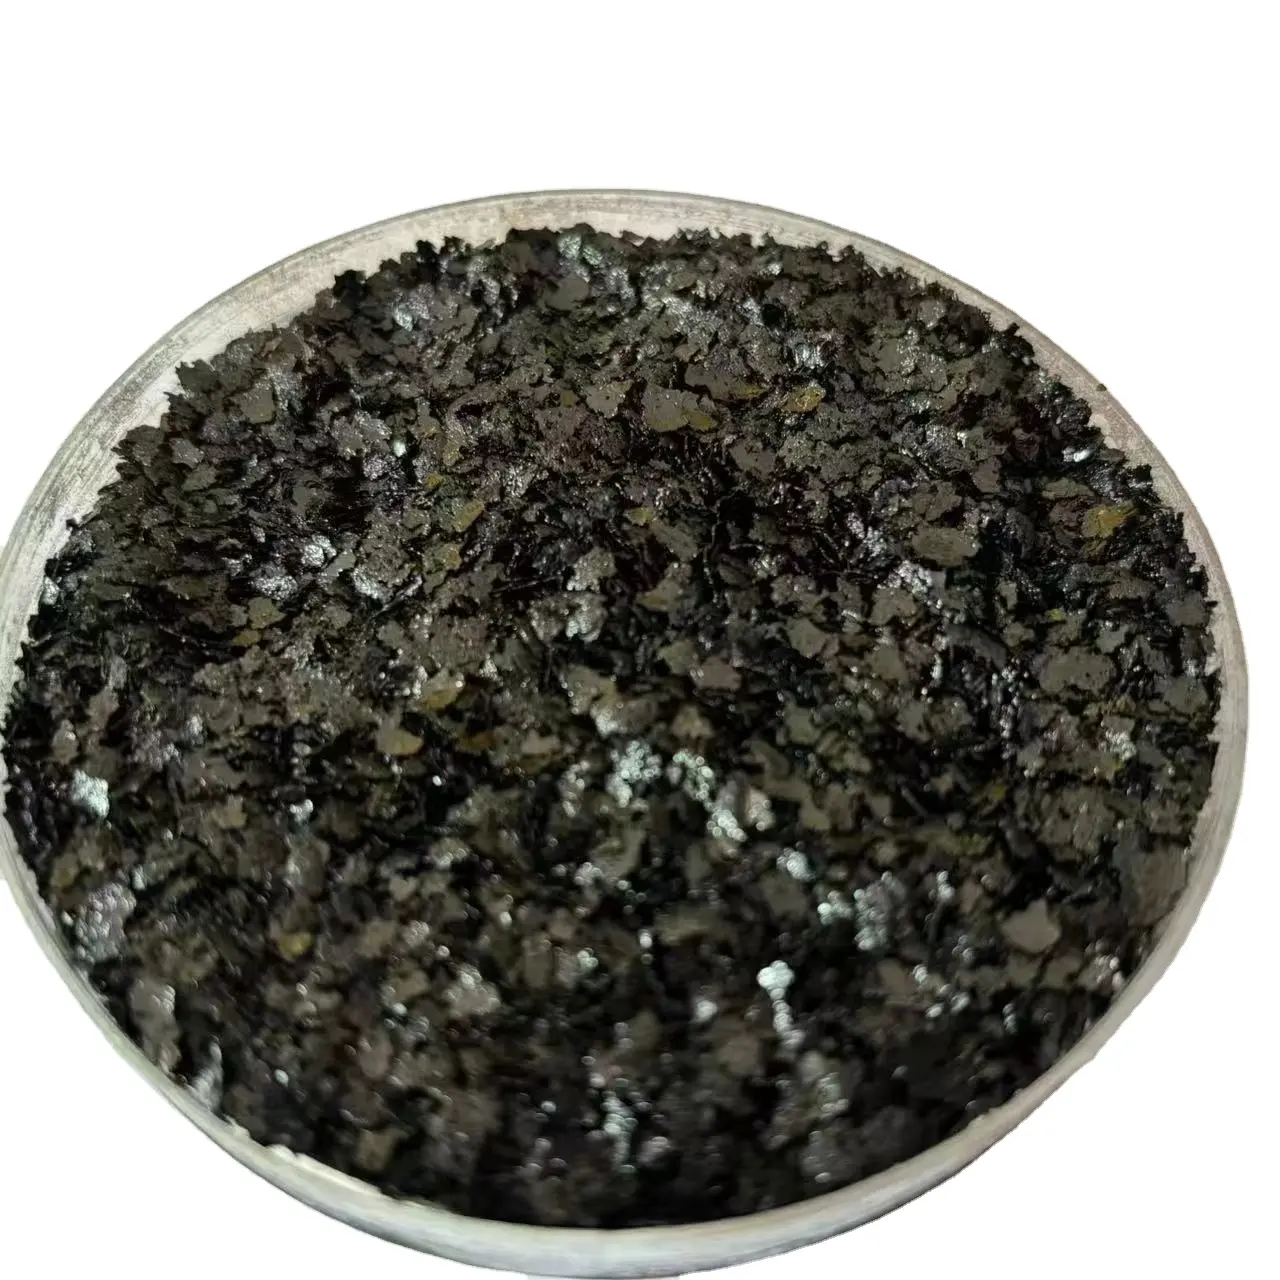 Potassium humate shiny flakes 98 humic acid mineral source granule having nutrients for plabt growth fertilizer manufacturing